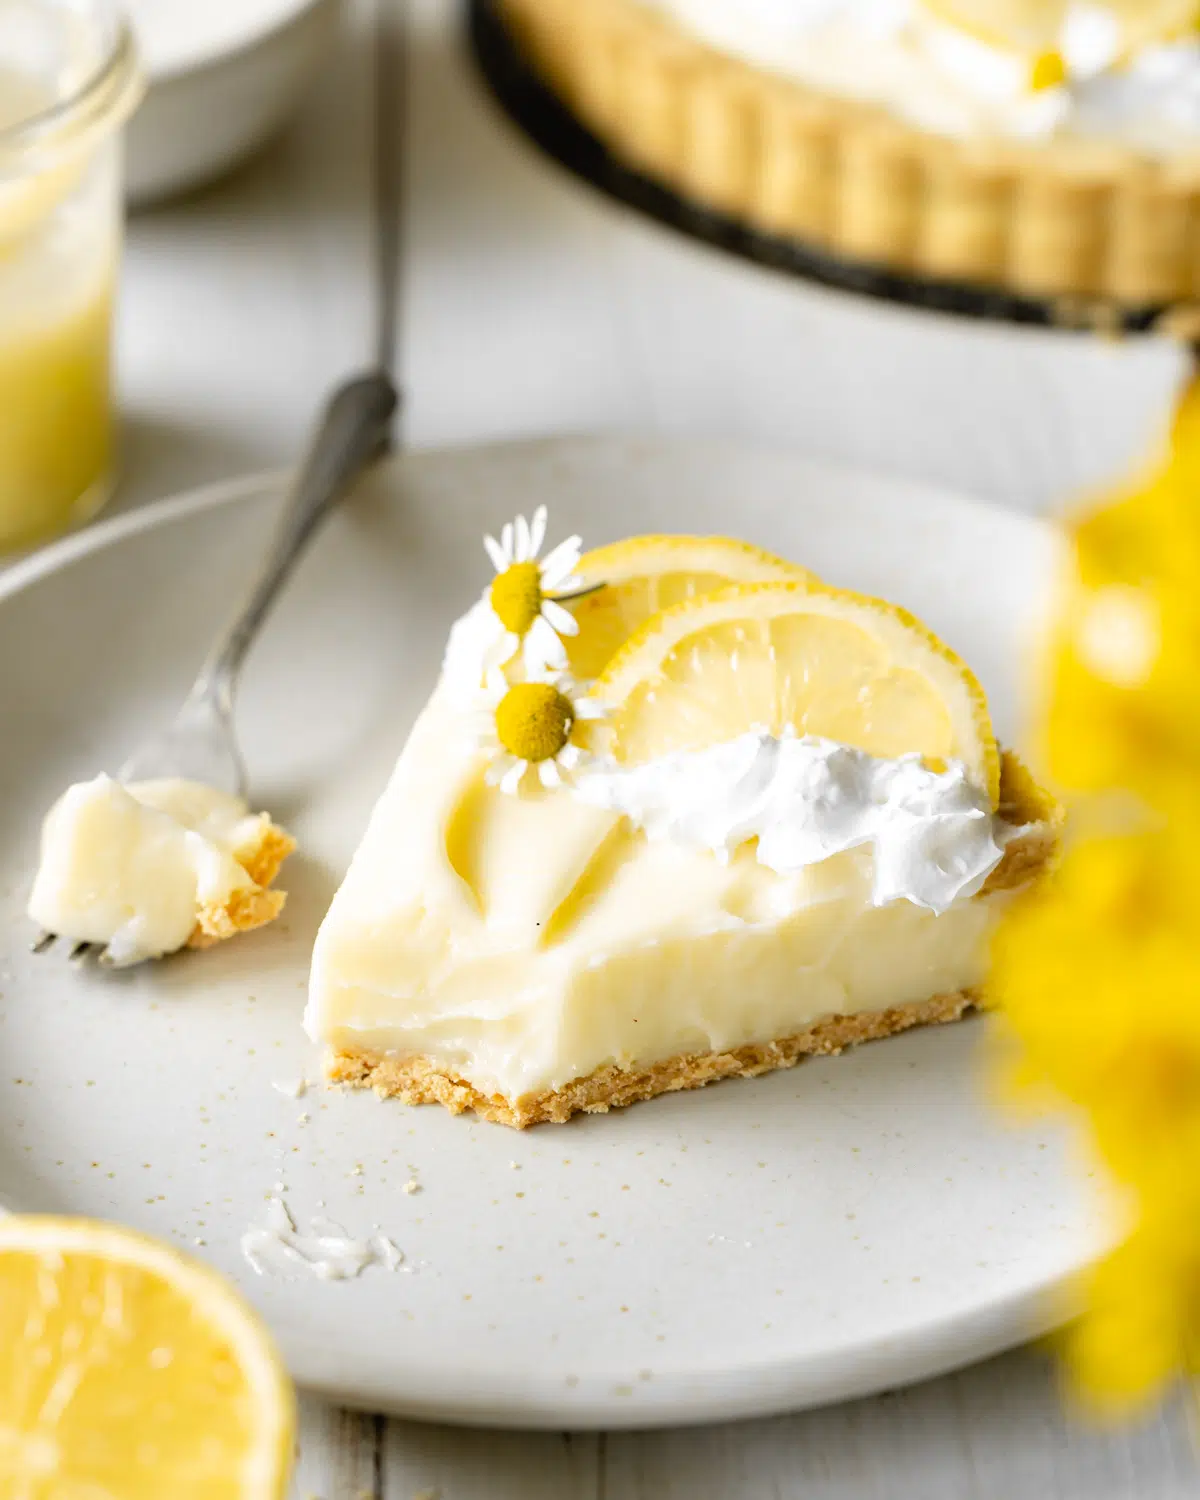 slice of creamy lemon tart with cream, lemon slices and chamomile flowers on top of a grey plate.